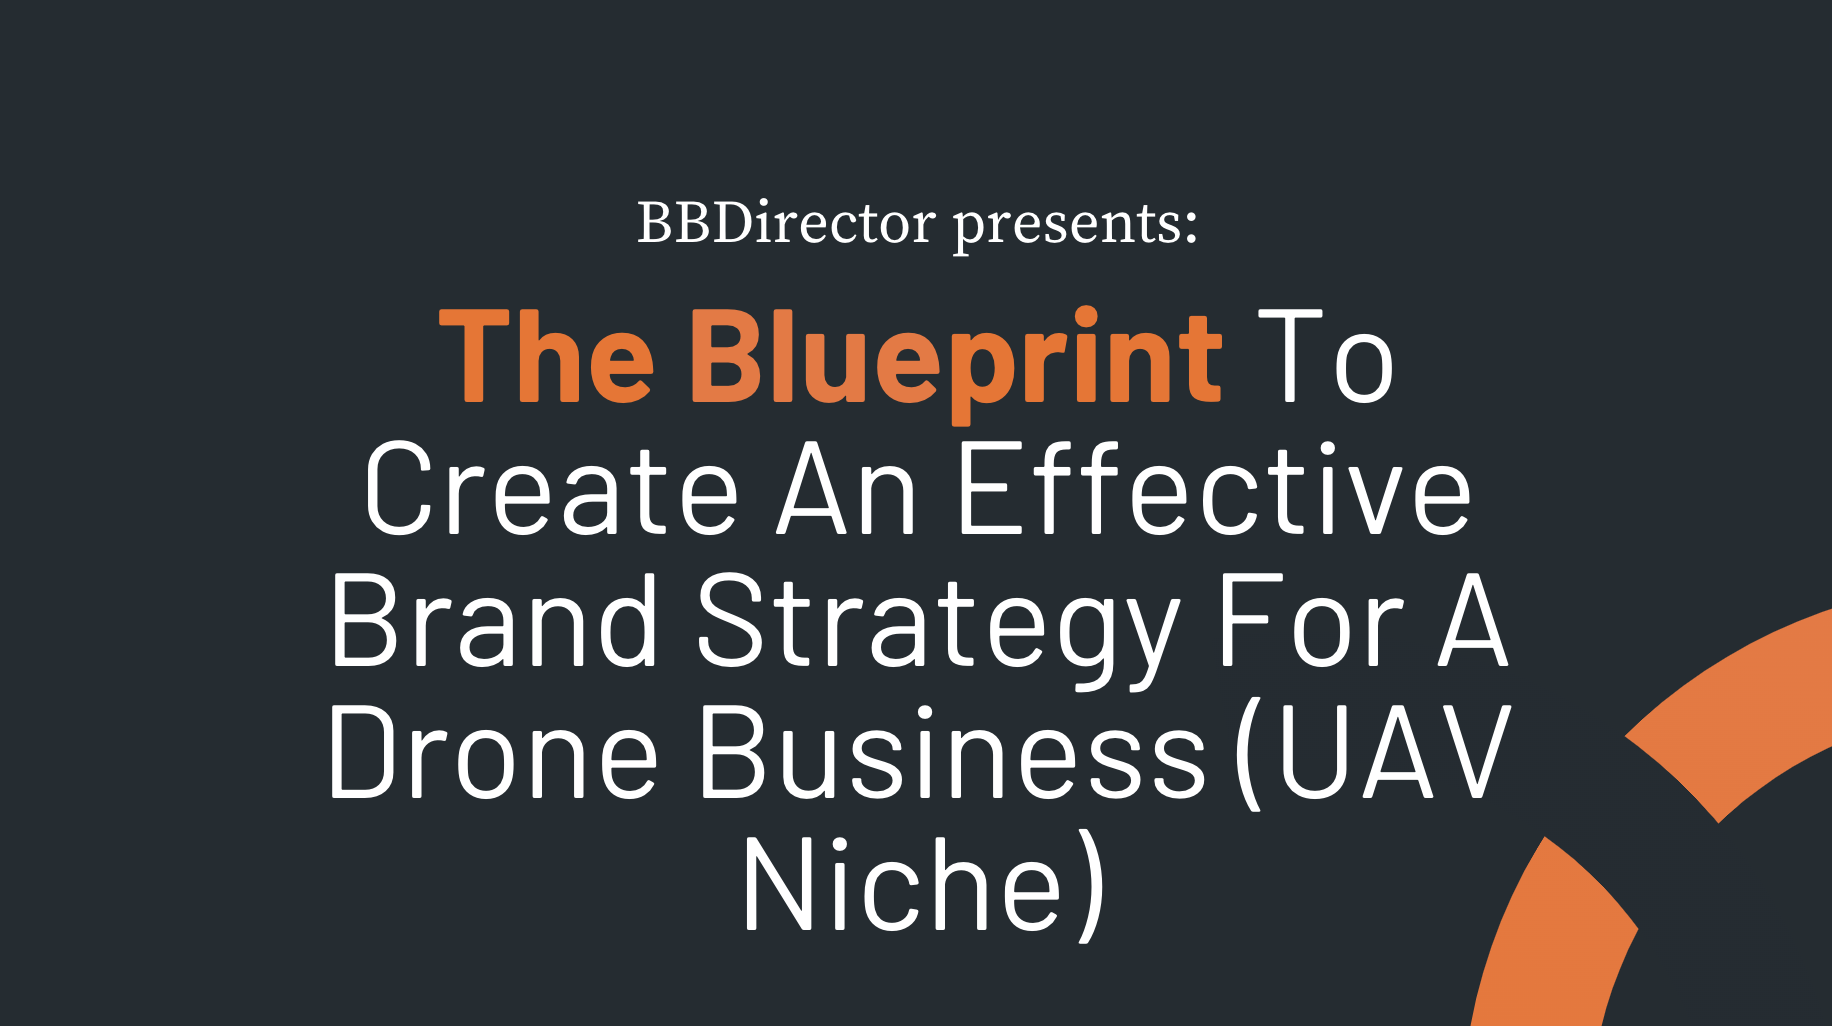 Branding Strategy Guide for A Drone Business